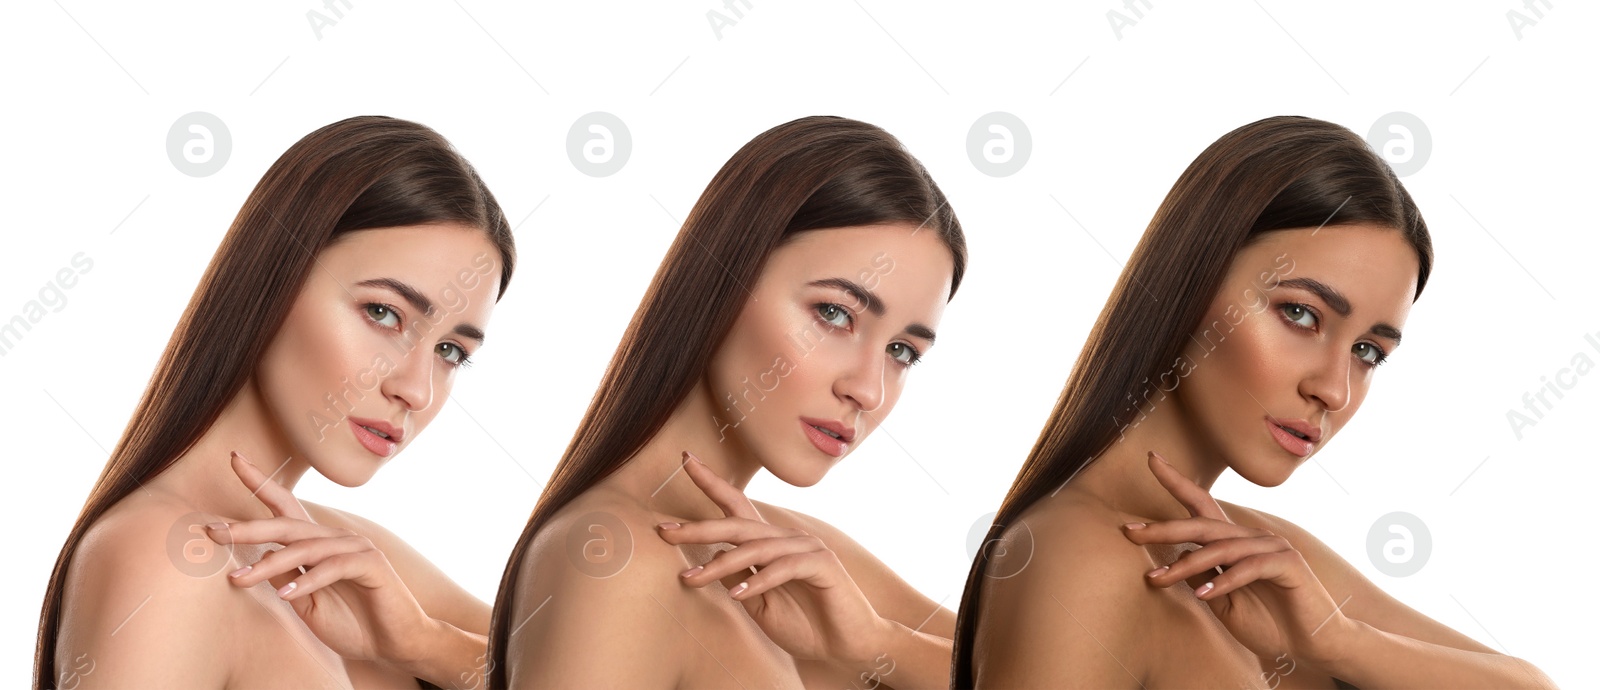 Image of Beautiful young woman on white background, banner design. Collage with photos showing stages of suntanning